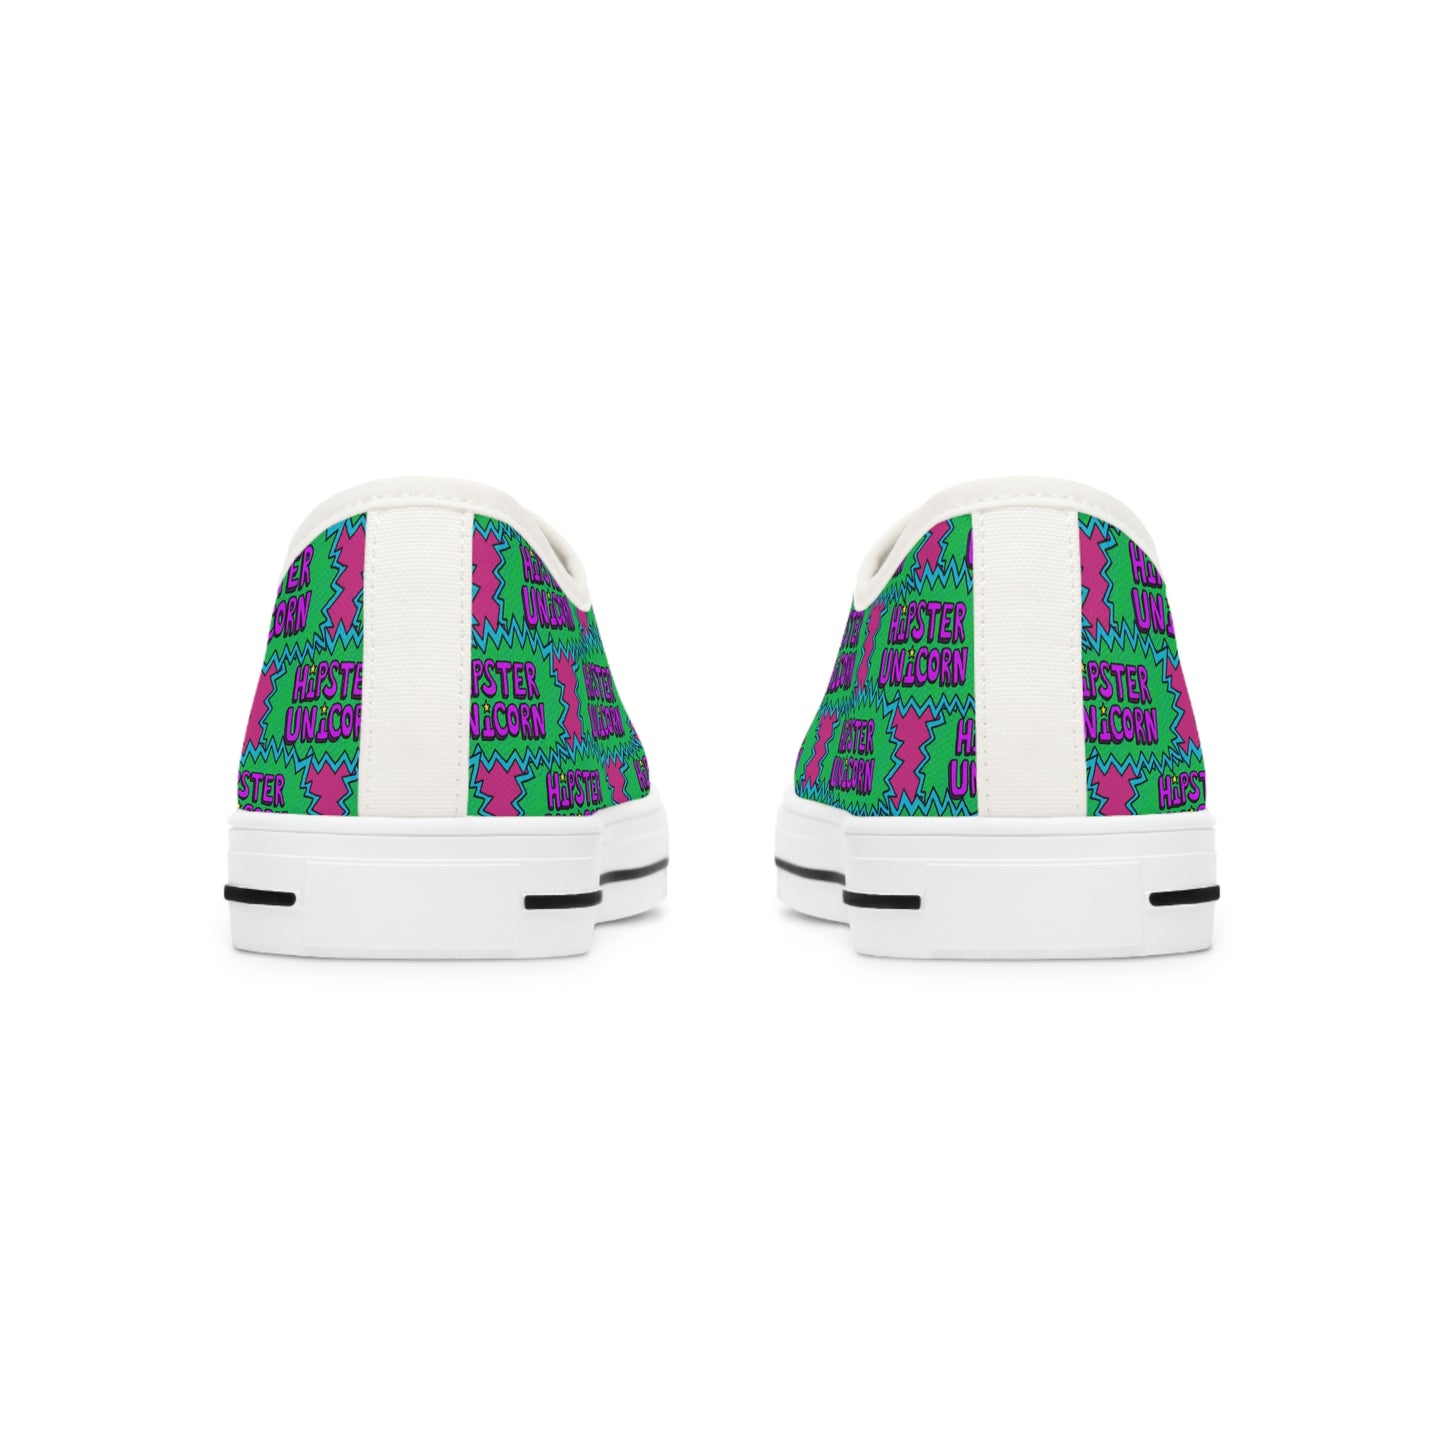 Hipster Unicorn Letter Sneakers